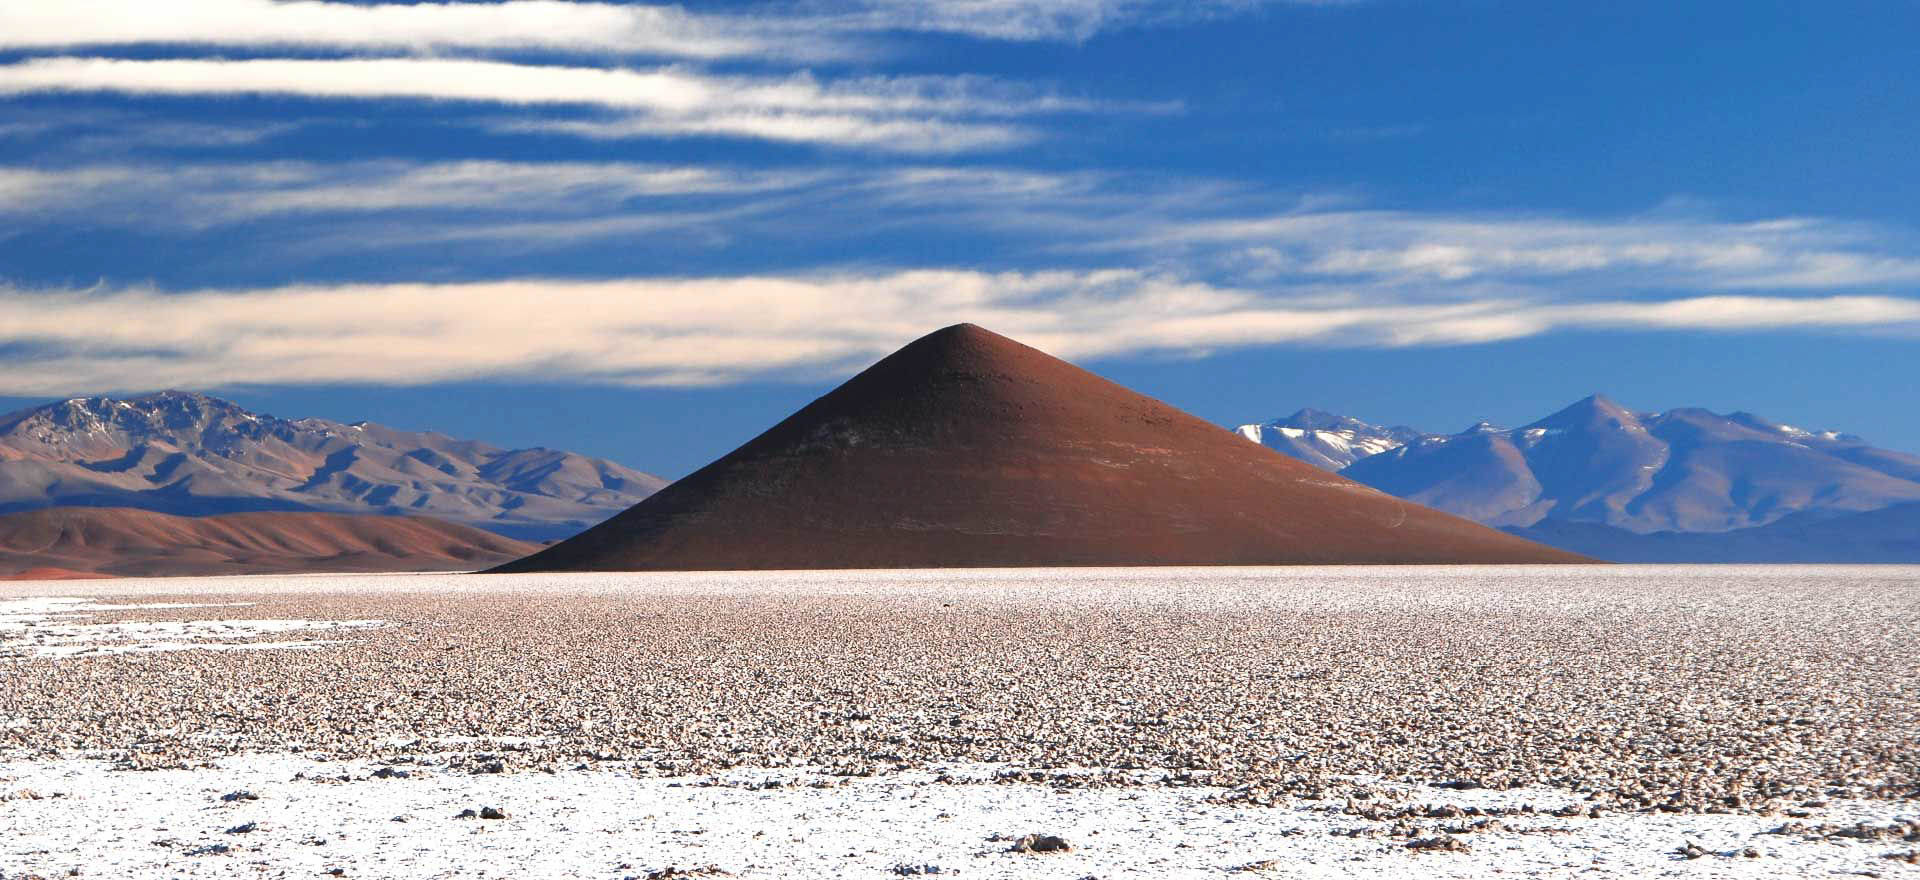 Volcanic cone in the high altitude desert - Argentina holidays